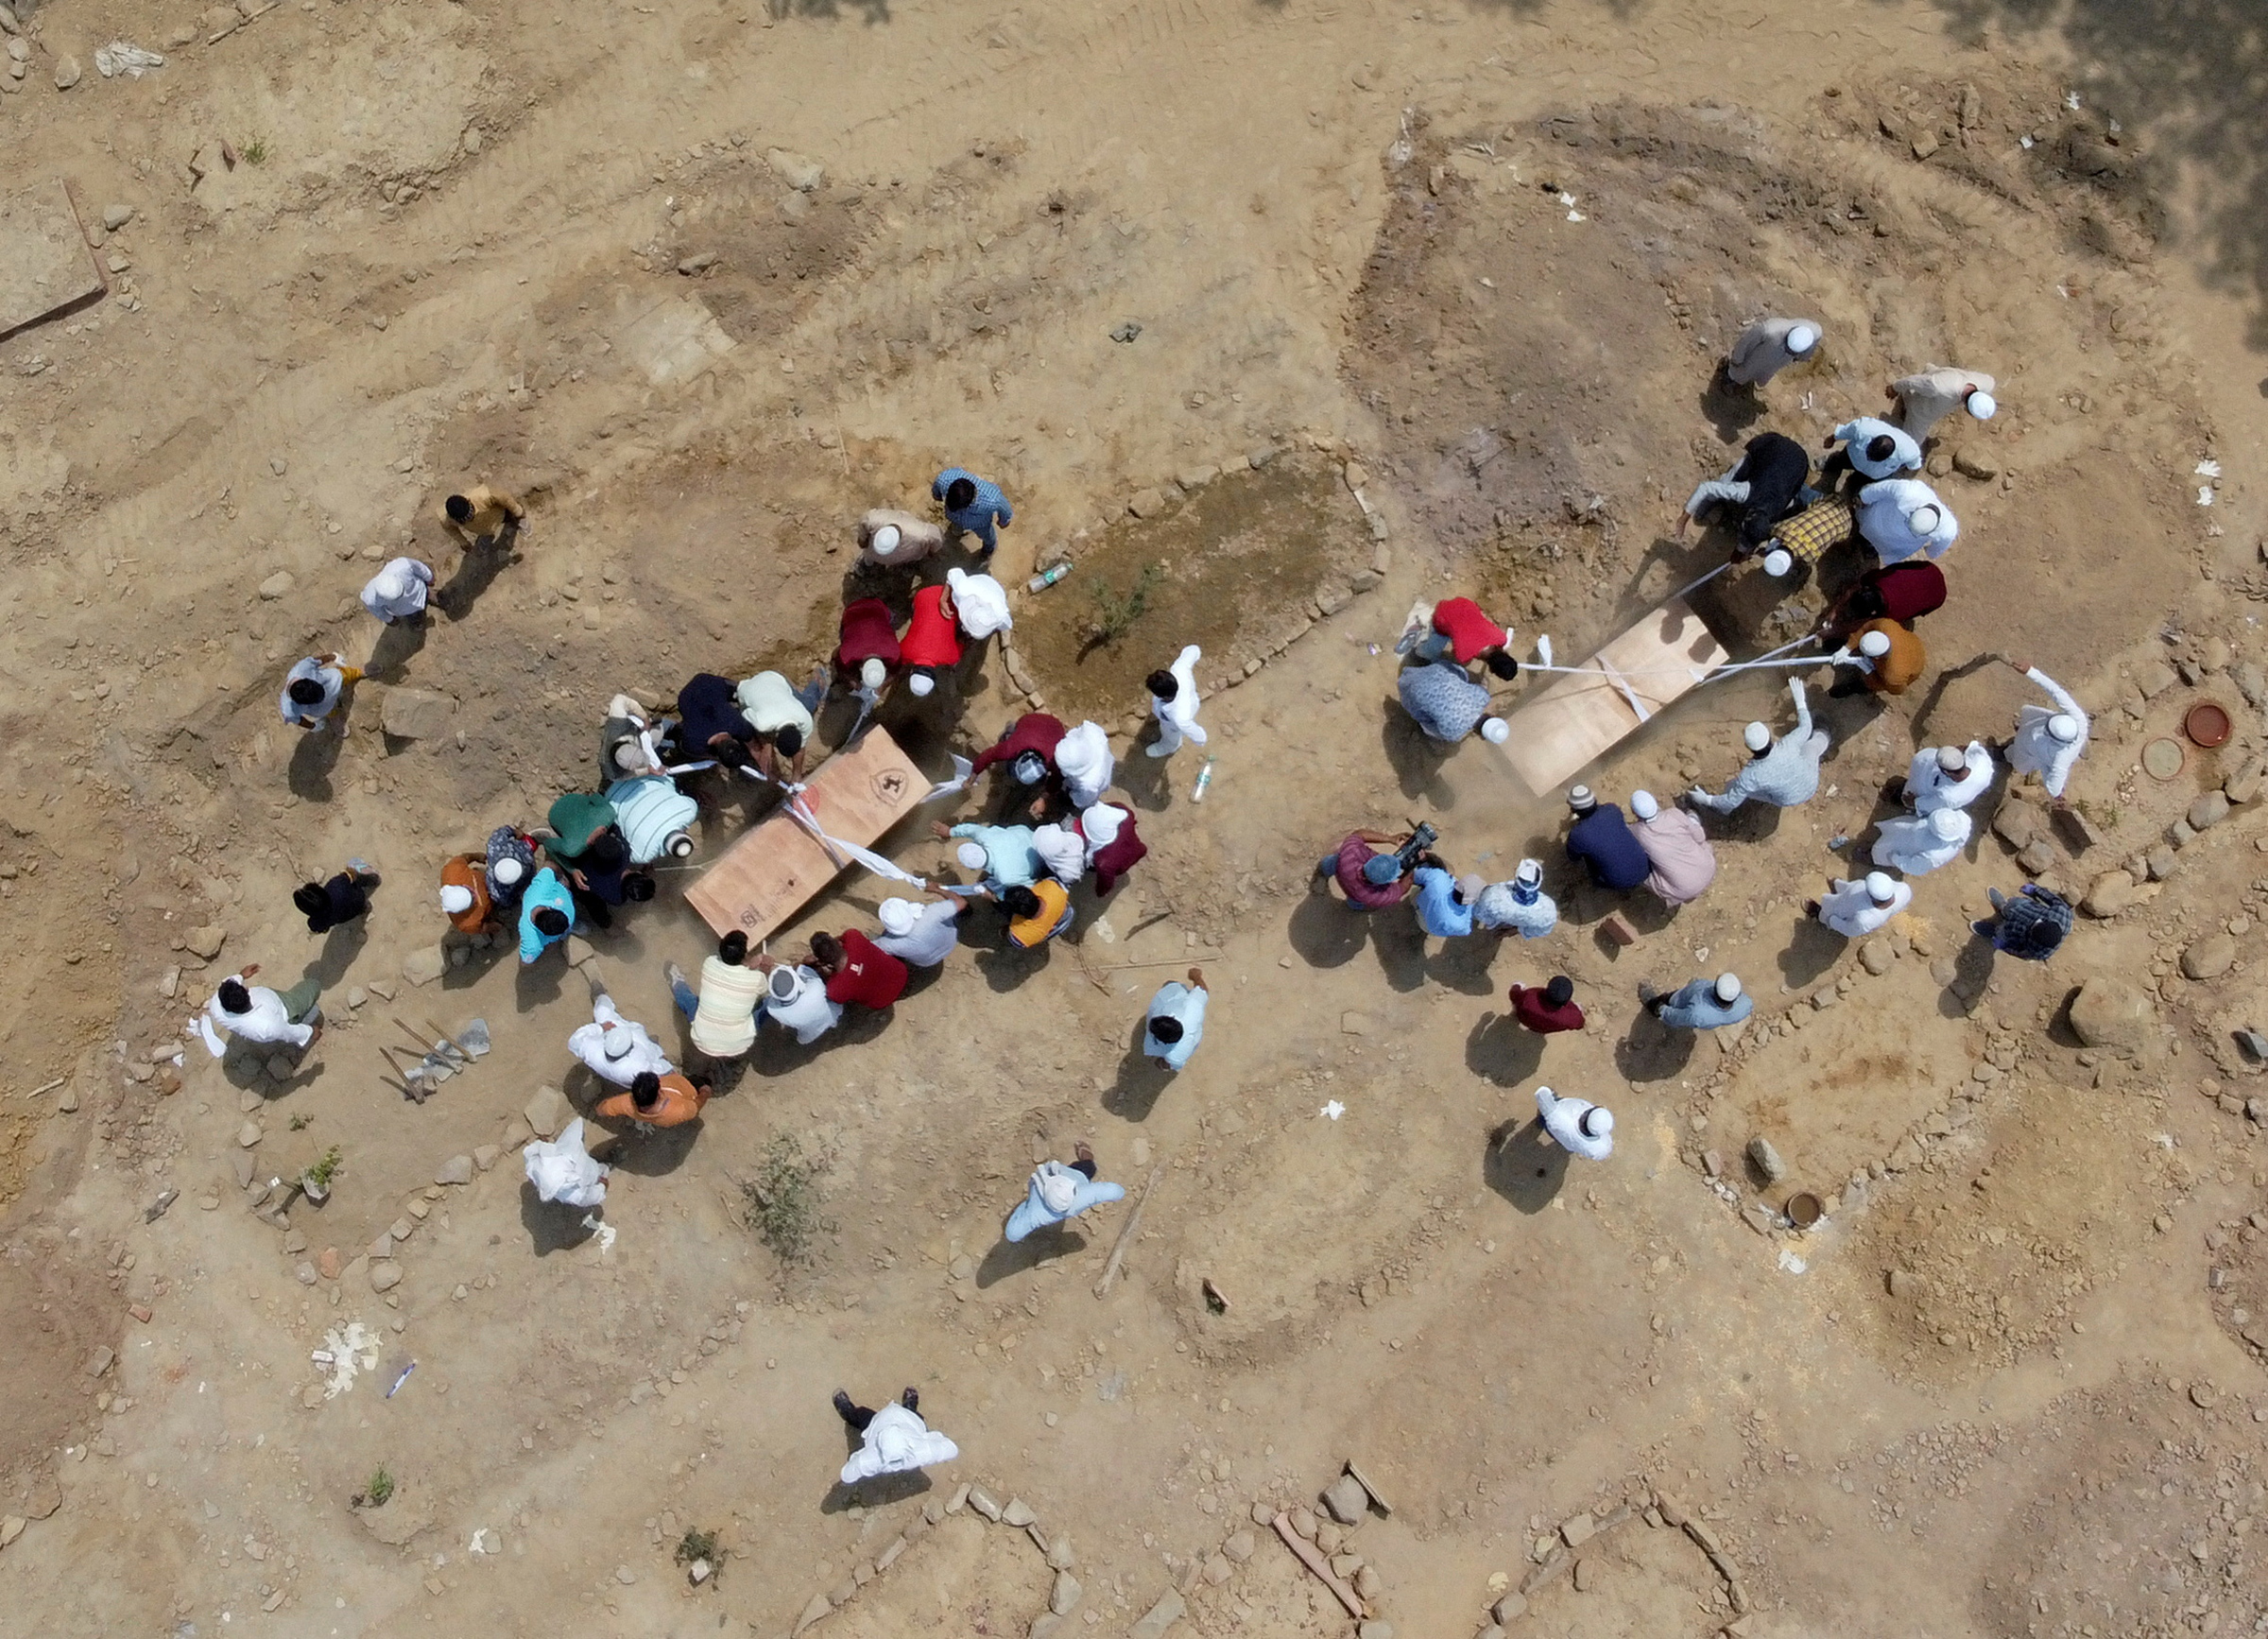 People bury the bodies of COVID-19 victims at a graveyard in New Delhi on April 16, 2021. (Danish Siddiqui—Reuters)